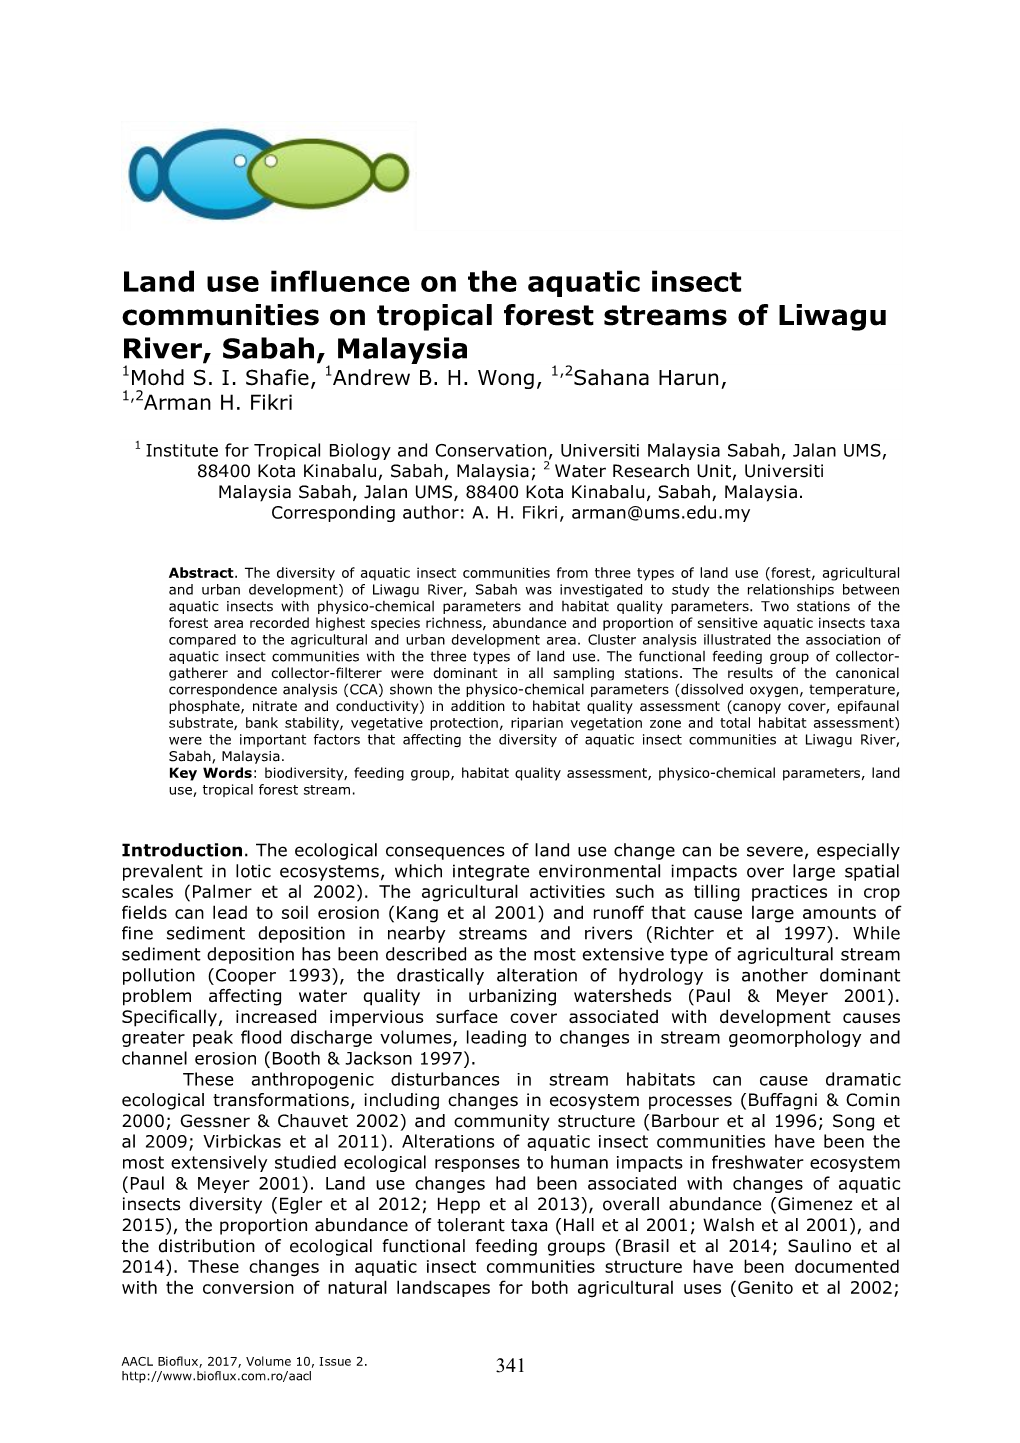 Land Use Influence on the Aquatic Insect Communities on Tropical Forest Streams of Liwagu River, Sabah, Malaysia 1Mohd S